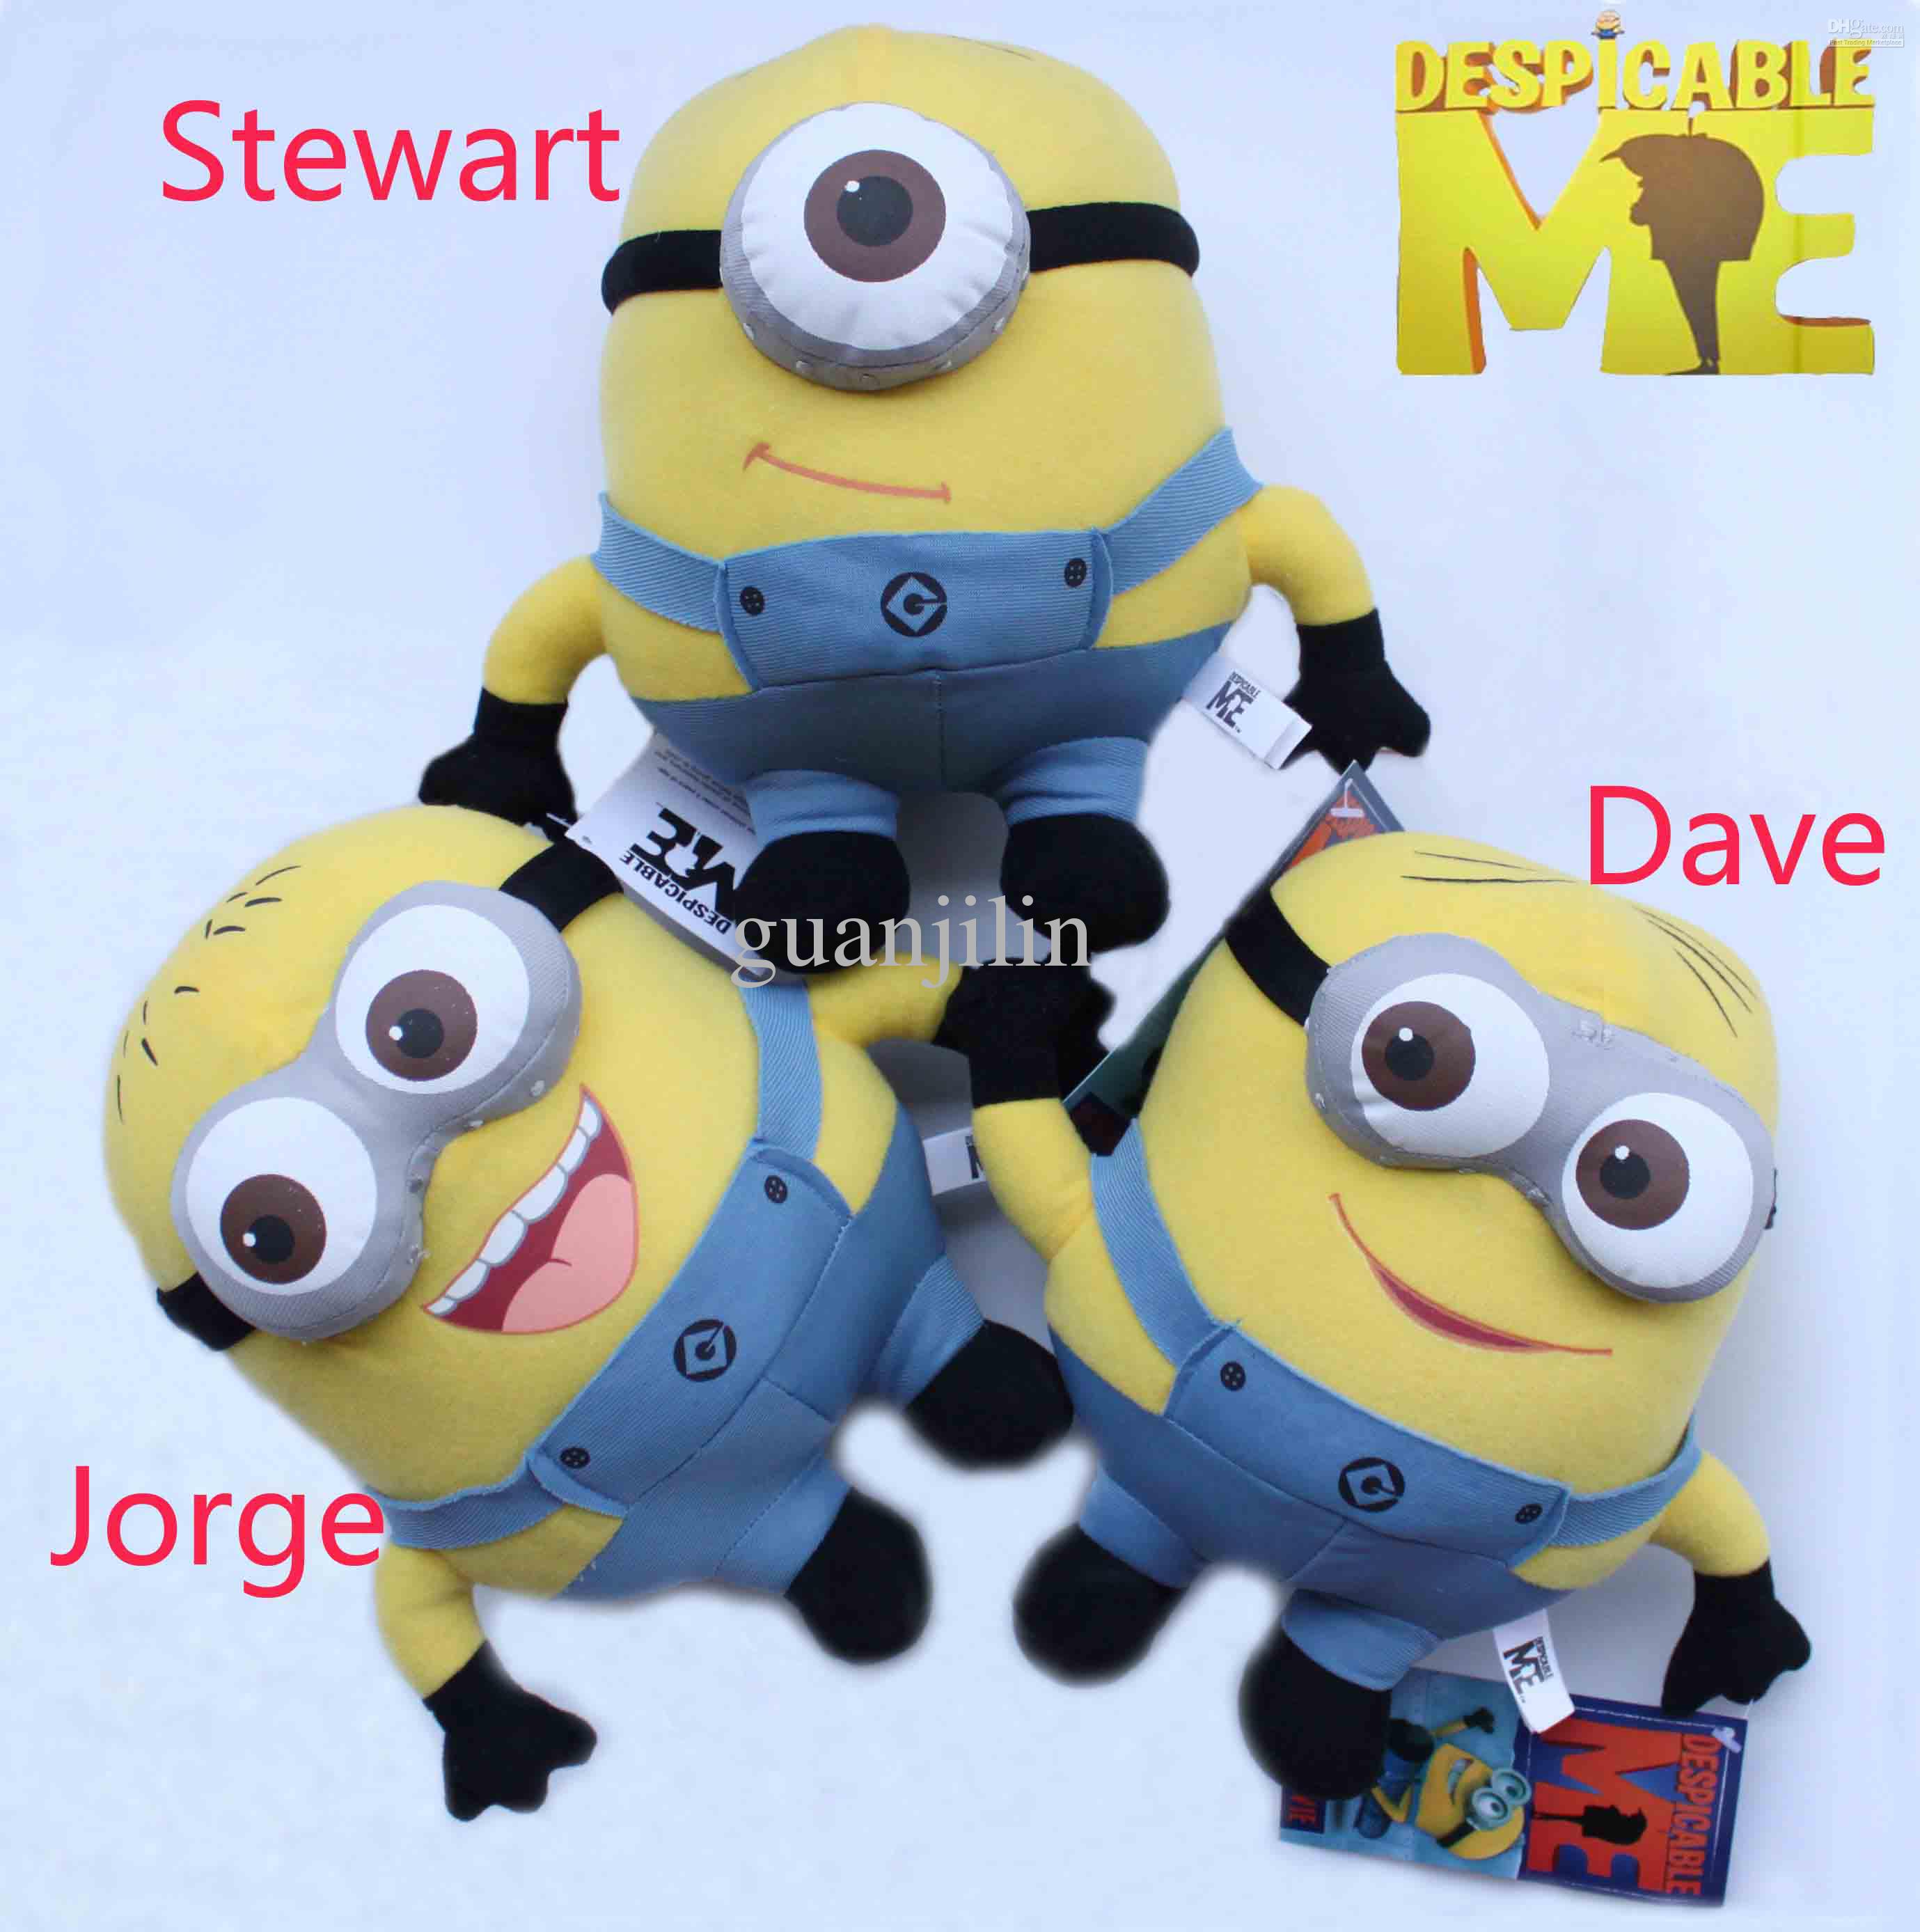 2018 3x Despicable Me Minion Plush Toy 3d Eye Stuffed Animal From ...